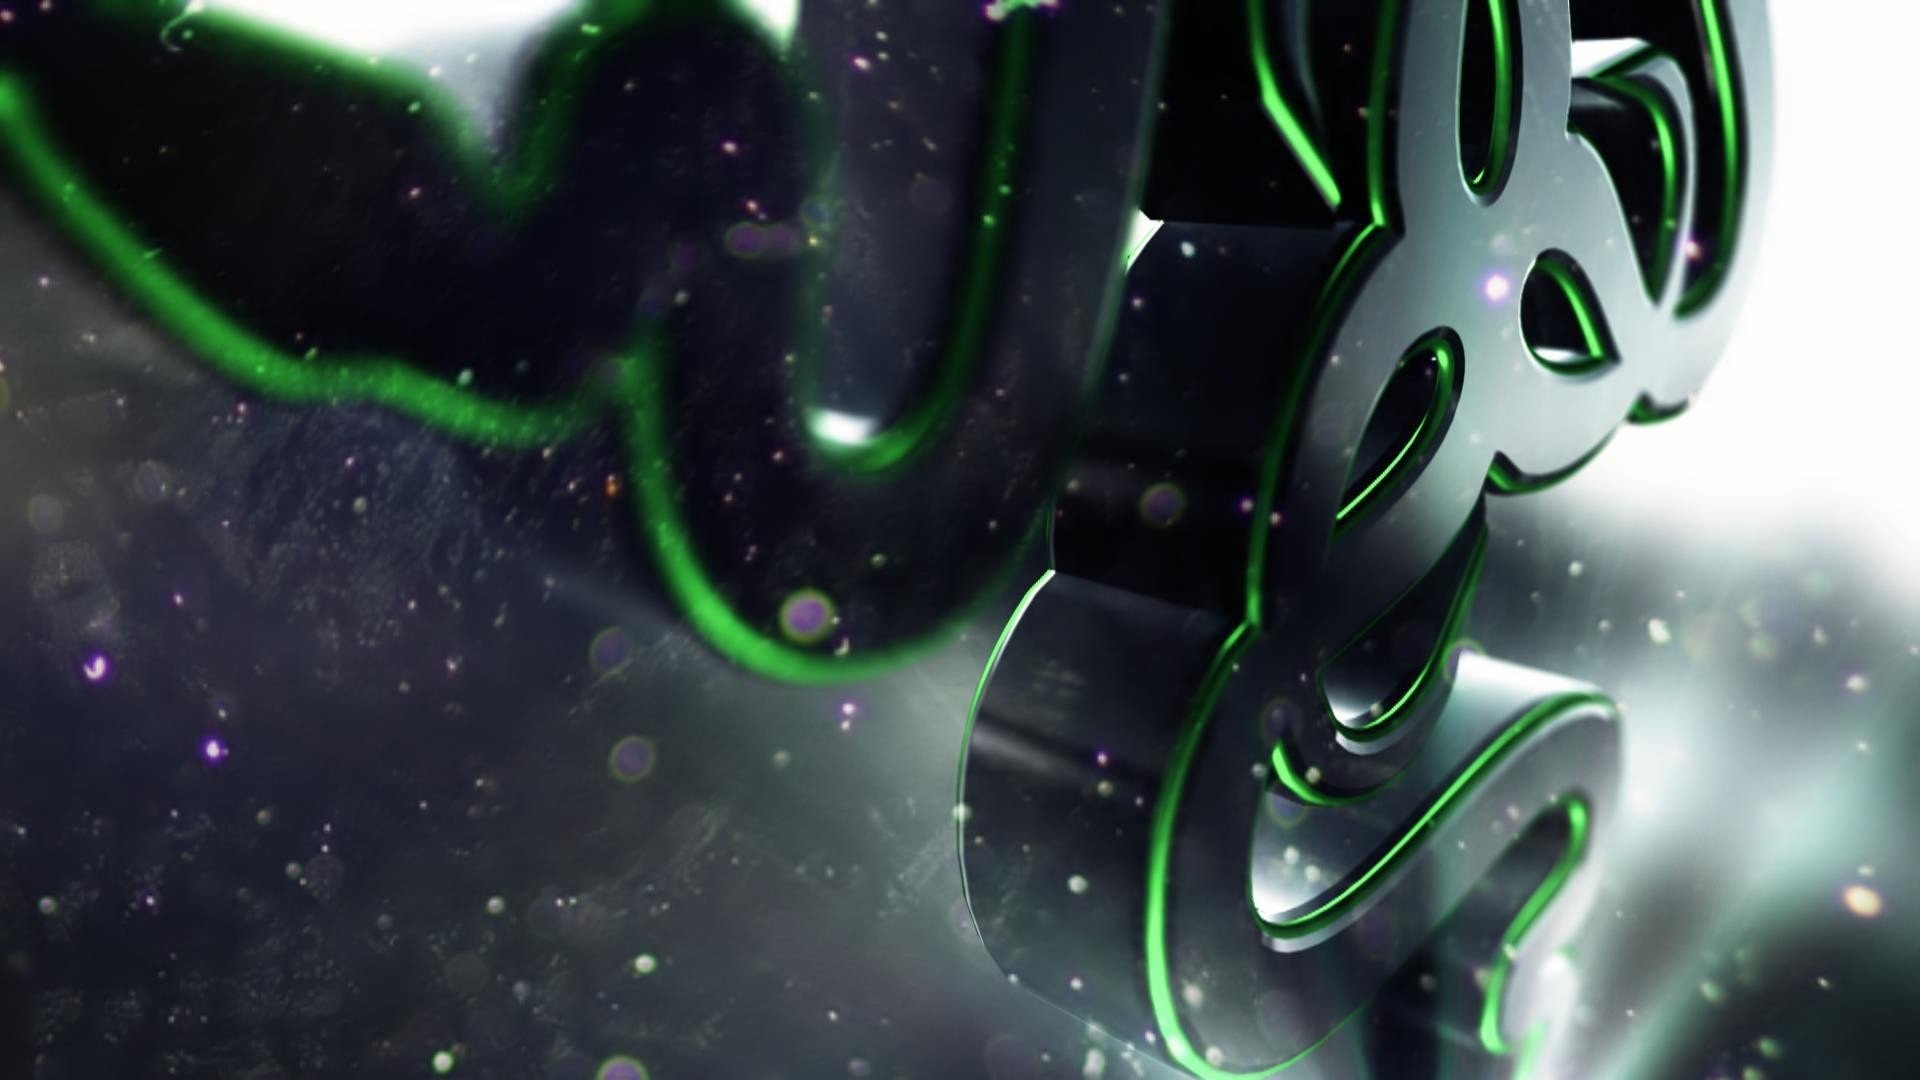 Free download RAZER GAMING computer game wallpaper 1920x1080 400694 [1920x1080] for your Desktop, Mobile & Tablet. Explore Razer Gaming Wallpaper. Red Razer Wallpaper HD, Razer Wallpaper 4K, Razer Wallpaper Windows 10